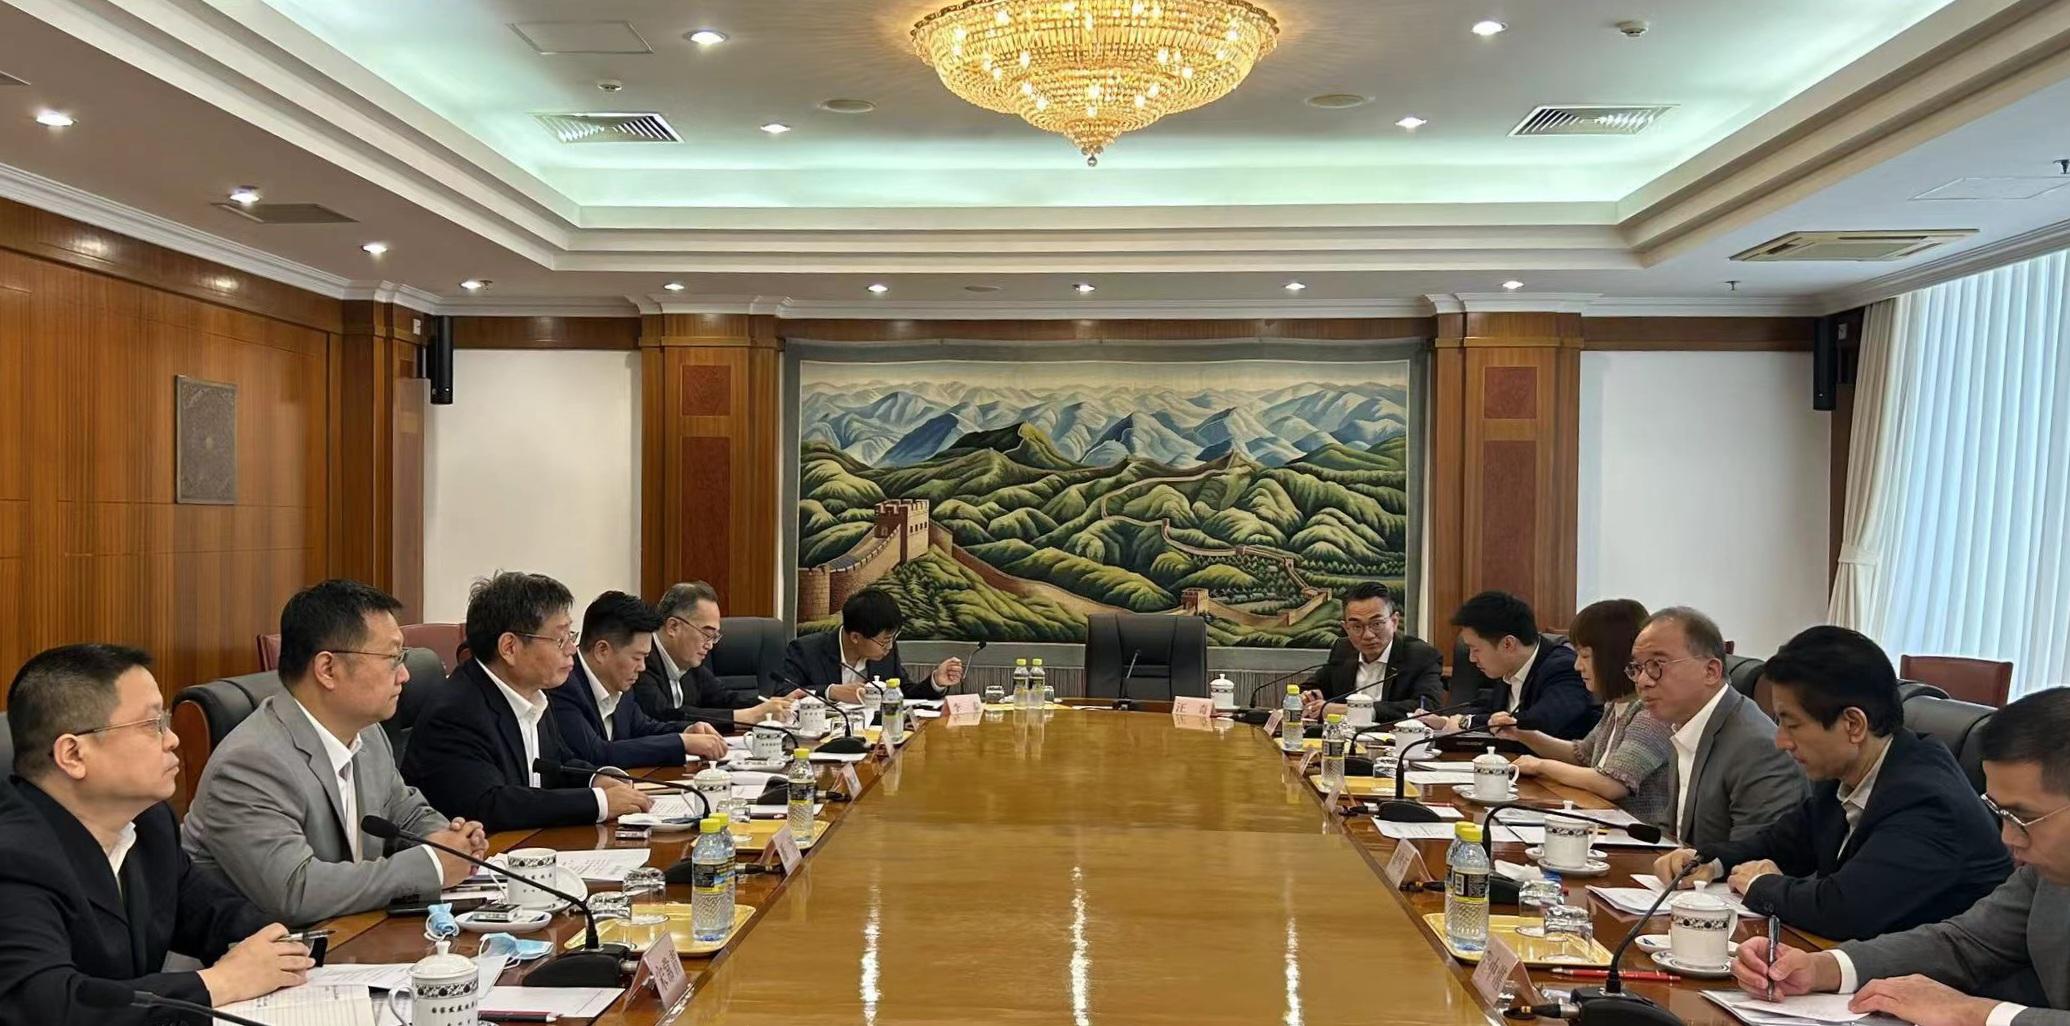 During his visit in Beijing, the Secretary for Constitutional and Mainland Affairs, Mr Erick Tsang Kwok-wai (third right), meets with Deputy Director of the National Development and Reform Commission Mr Guo Lanfeng (third left). Also attending the meeting are the Commissioner for the Development of the Guangdong-Hong Kong-Macao Greater Bay Area, Ms Maisie Chan (fourth right), and the Director of the Office of the Government of the Hong Kong Special Administrative Region in Beijing, Mr Rex Chang (second right).